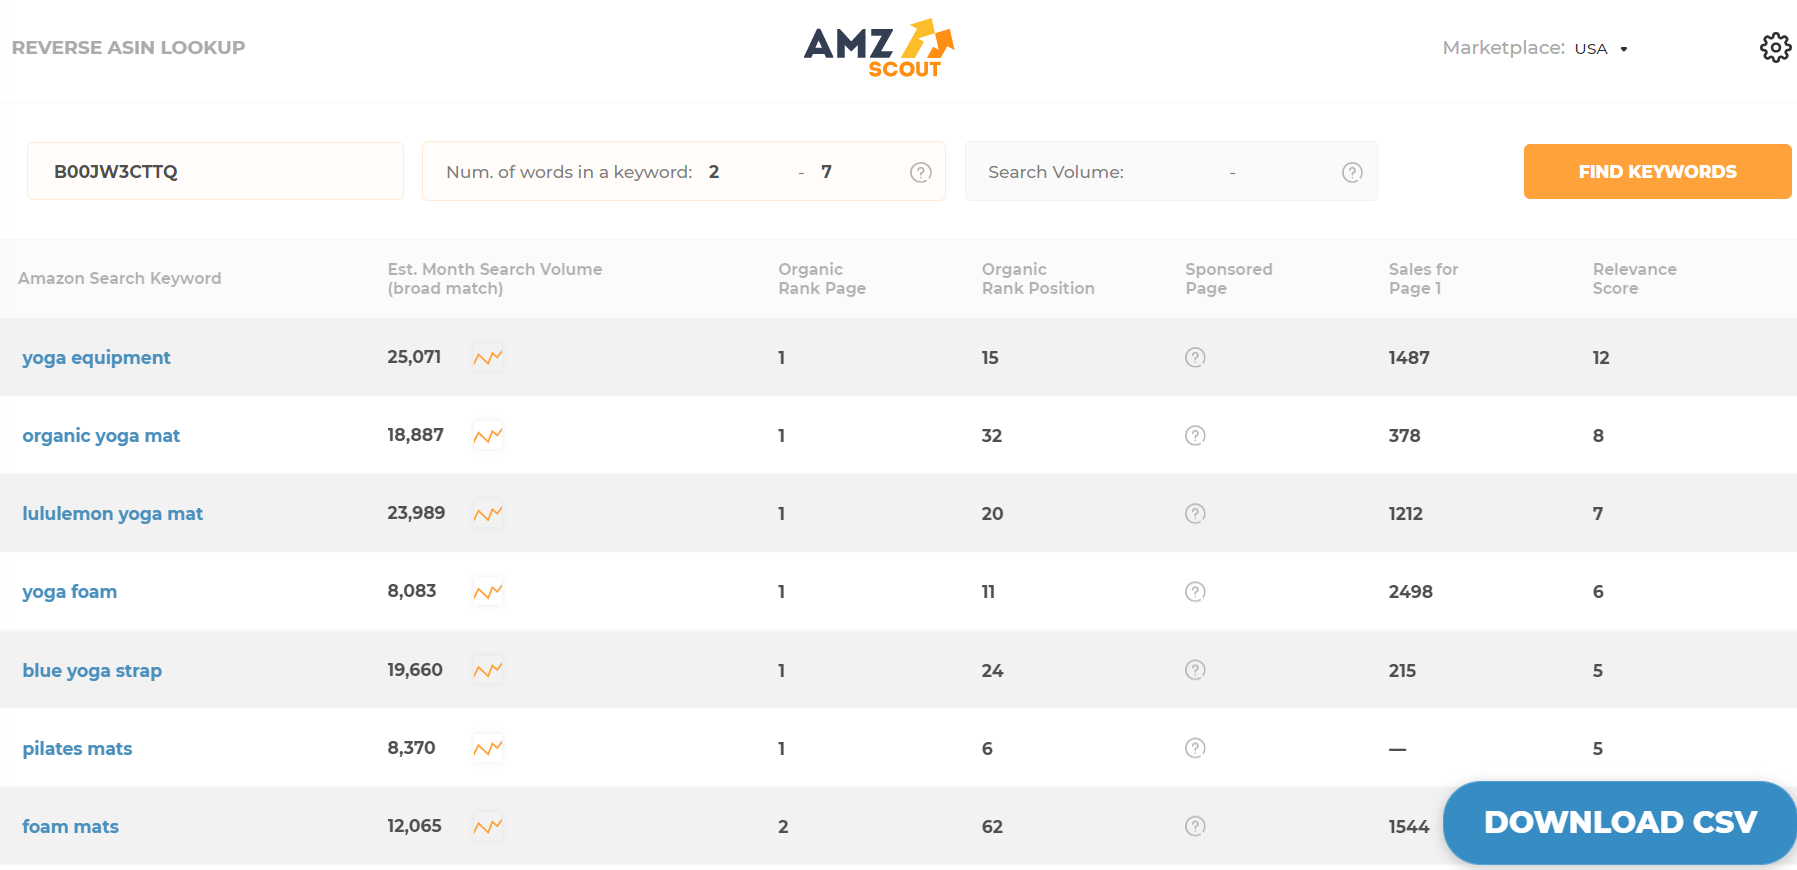 How to use AMZScout Reverse ASIN Lookup tool